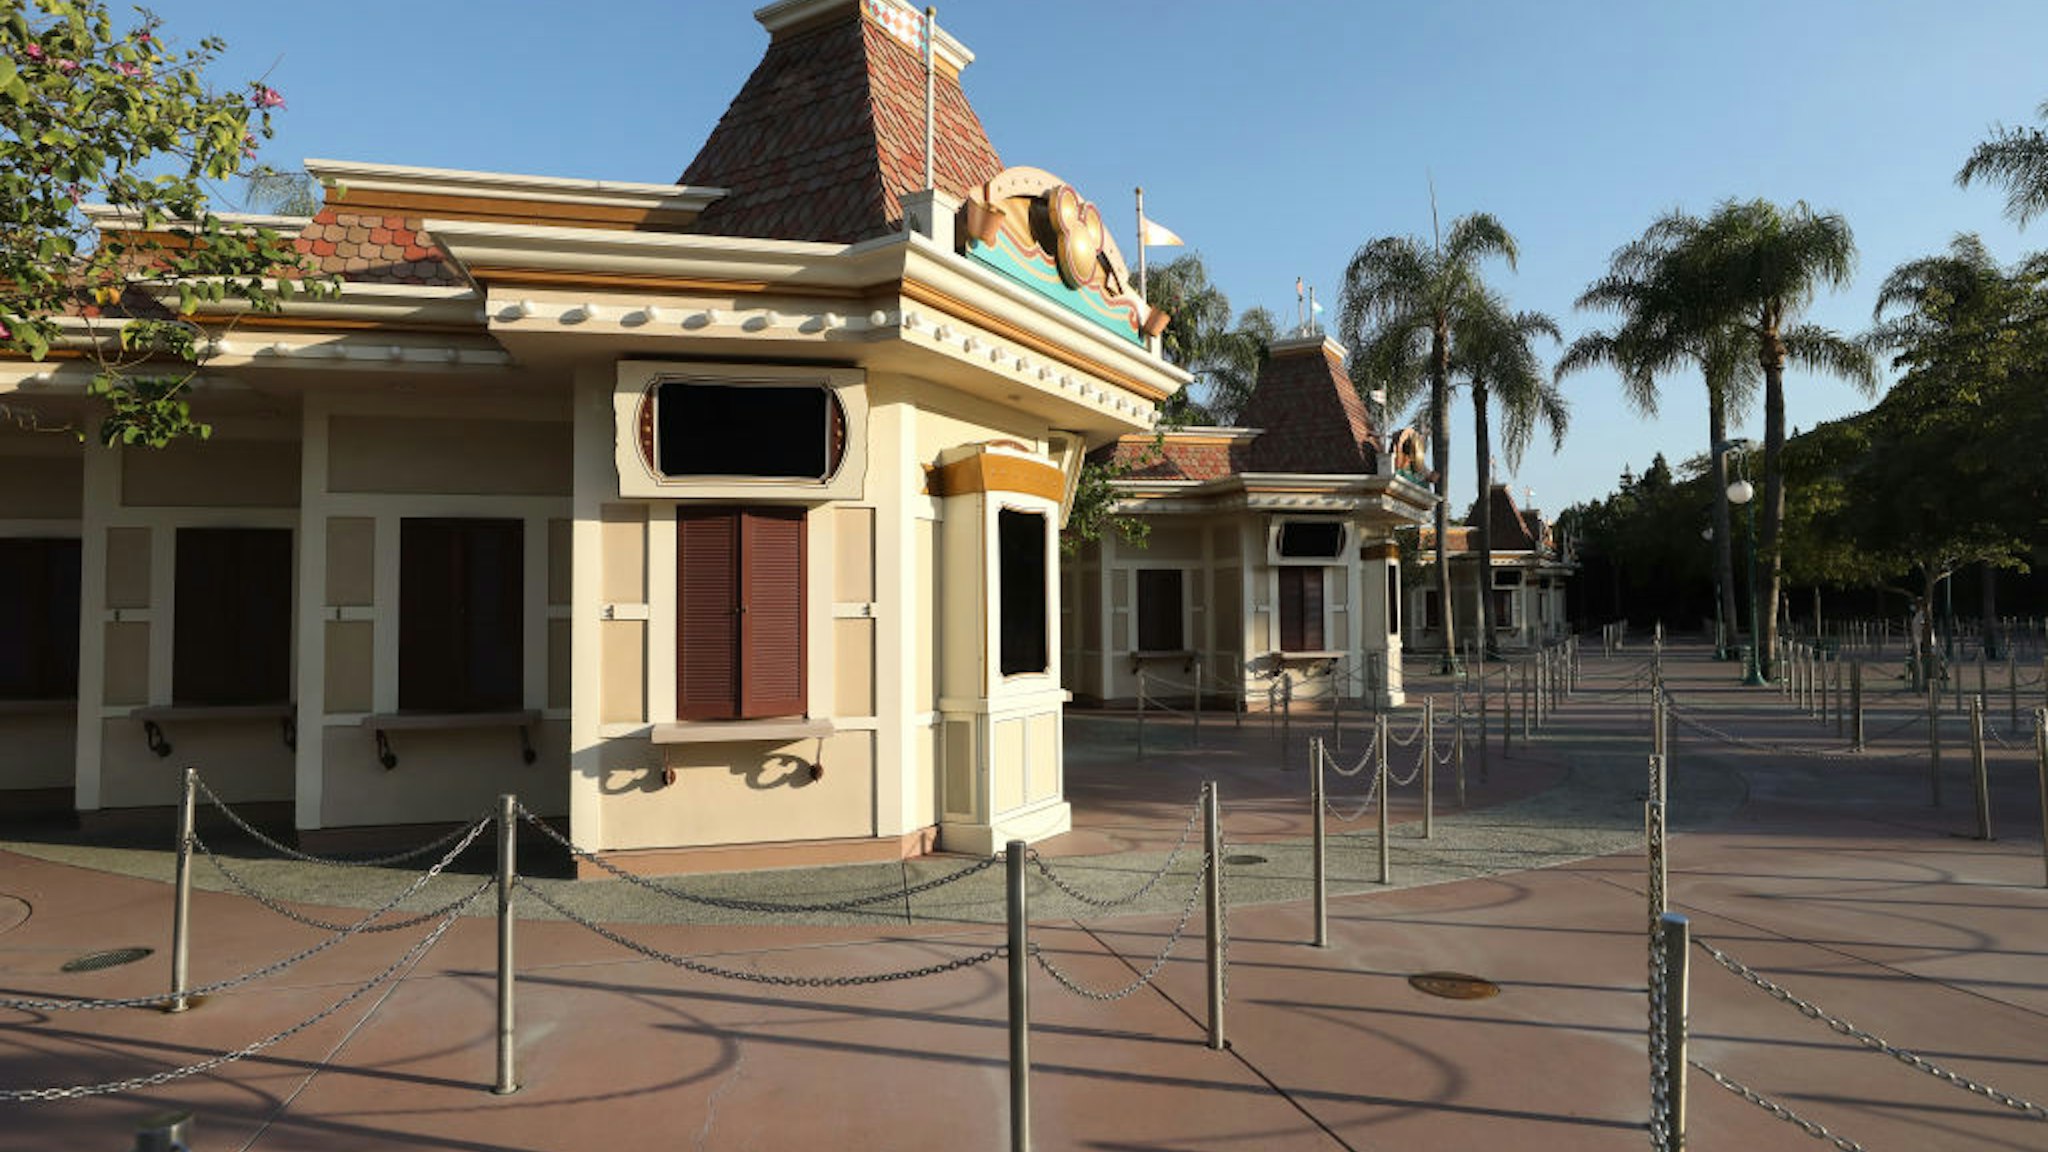 ANAHEIM, CALIFORNIA - SEPTEMBER 30: Shuttered ticket windows stand outside the Disneyland theme park on September 30, 2020 in Anaheim, California. Disney is laying off 28,000 workers amid the toll of the COVID-19 pandemic on theme parks.